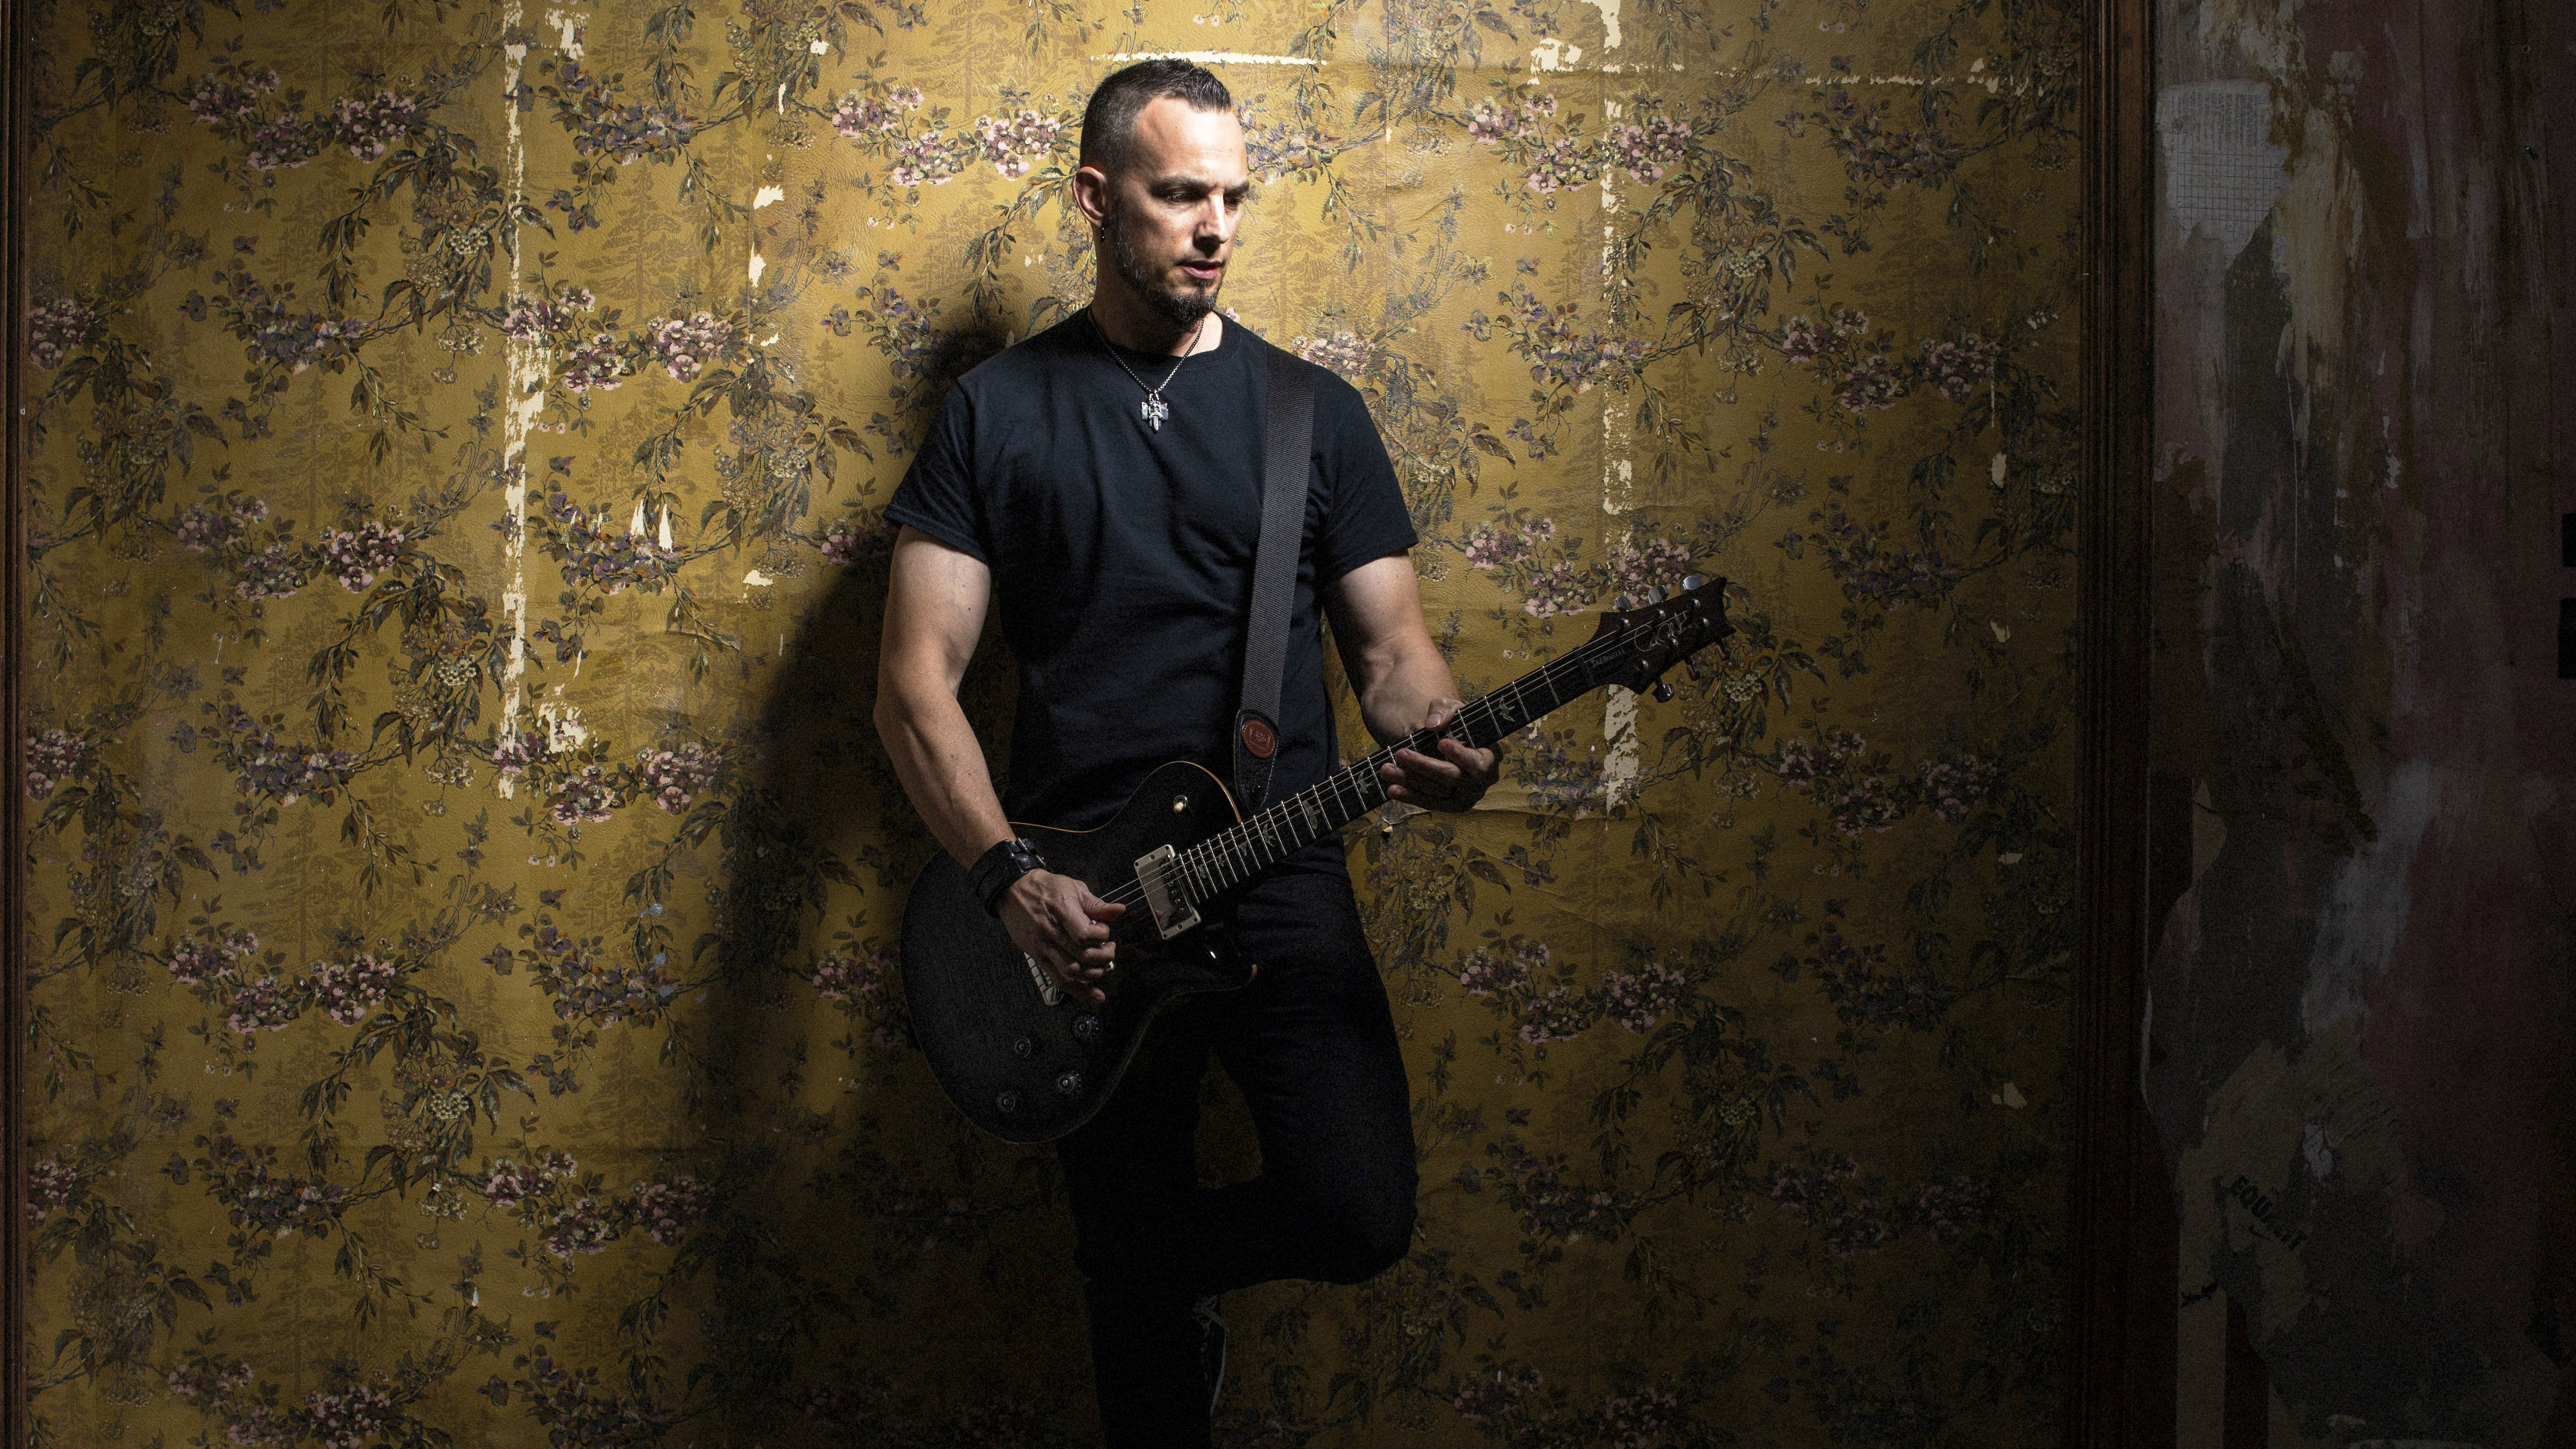 Mark Tremonti S 10 Greatest Guitar Moments Guitar World Watch over you a€ by alter bridge. mark tremonti s 10 greatest guitar